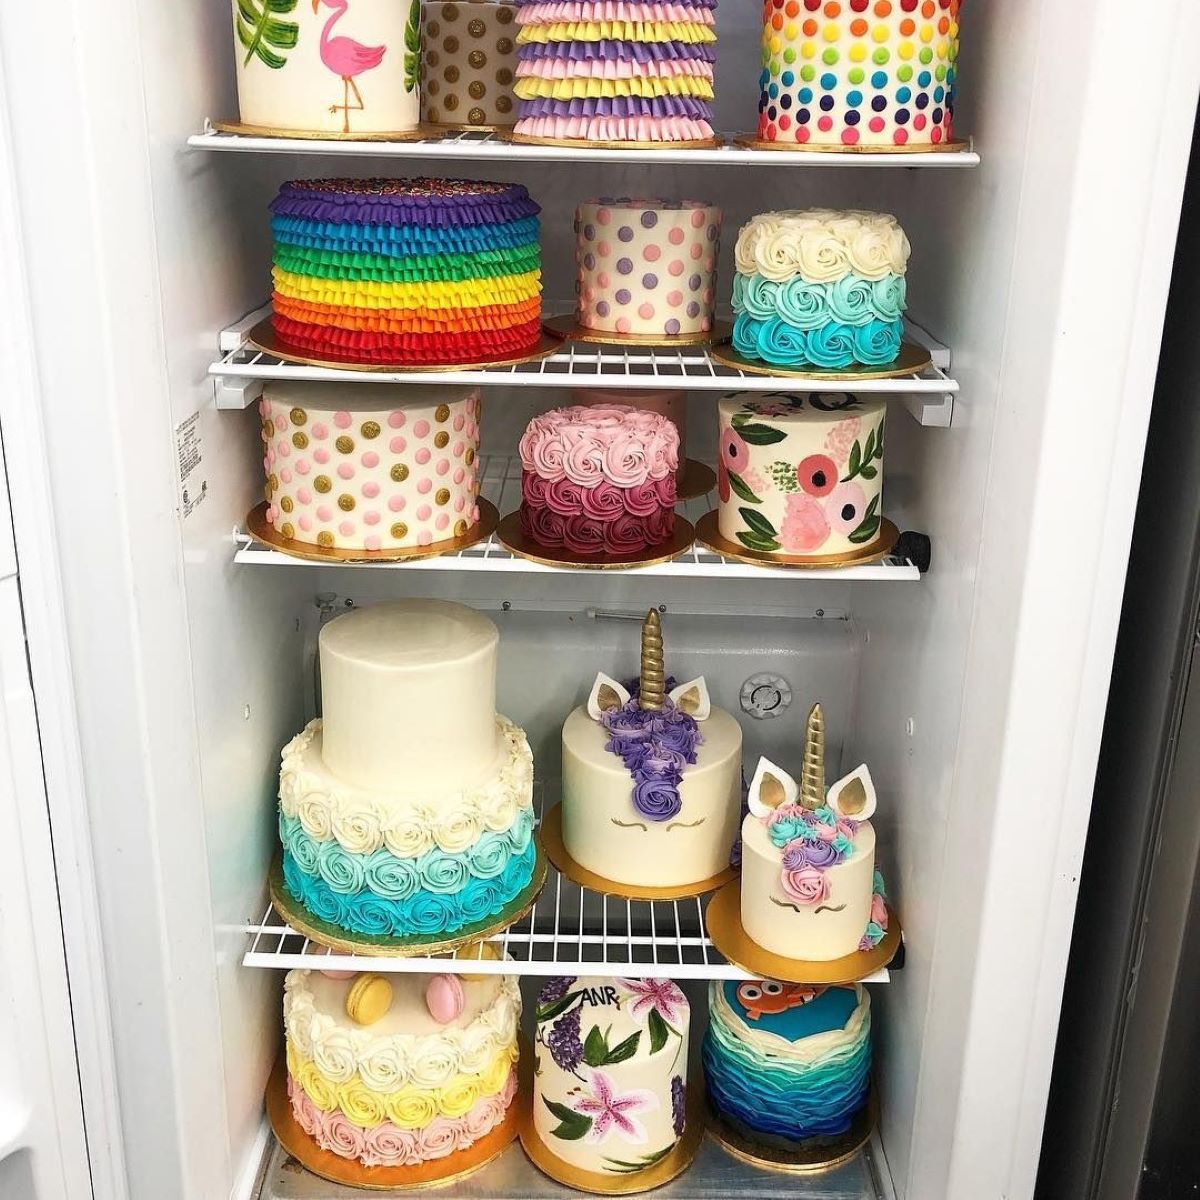 How To Store A Fondant Cake In The Fridge